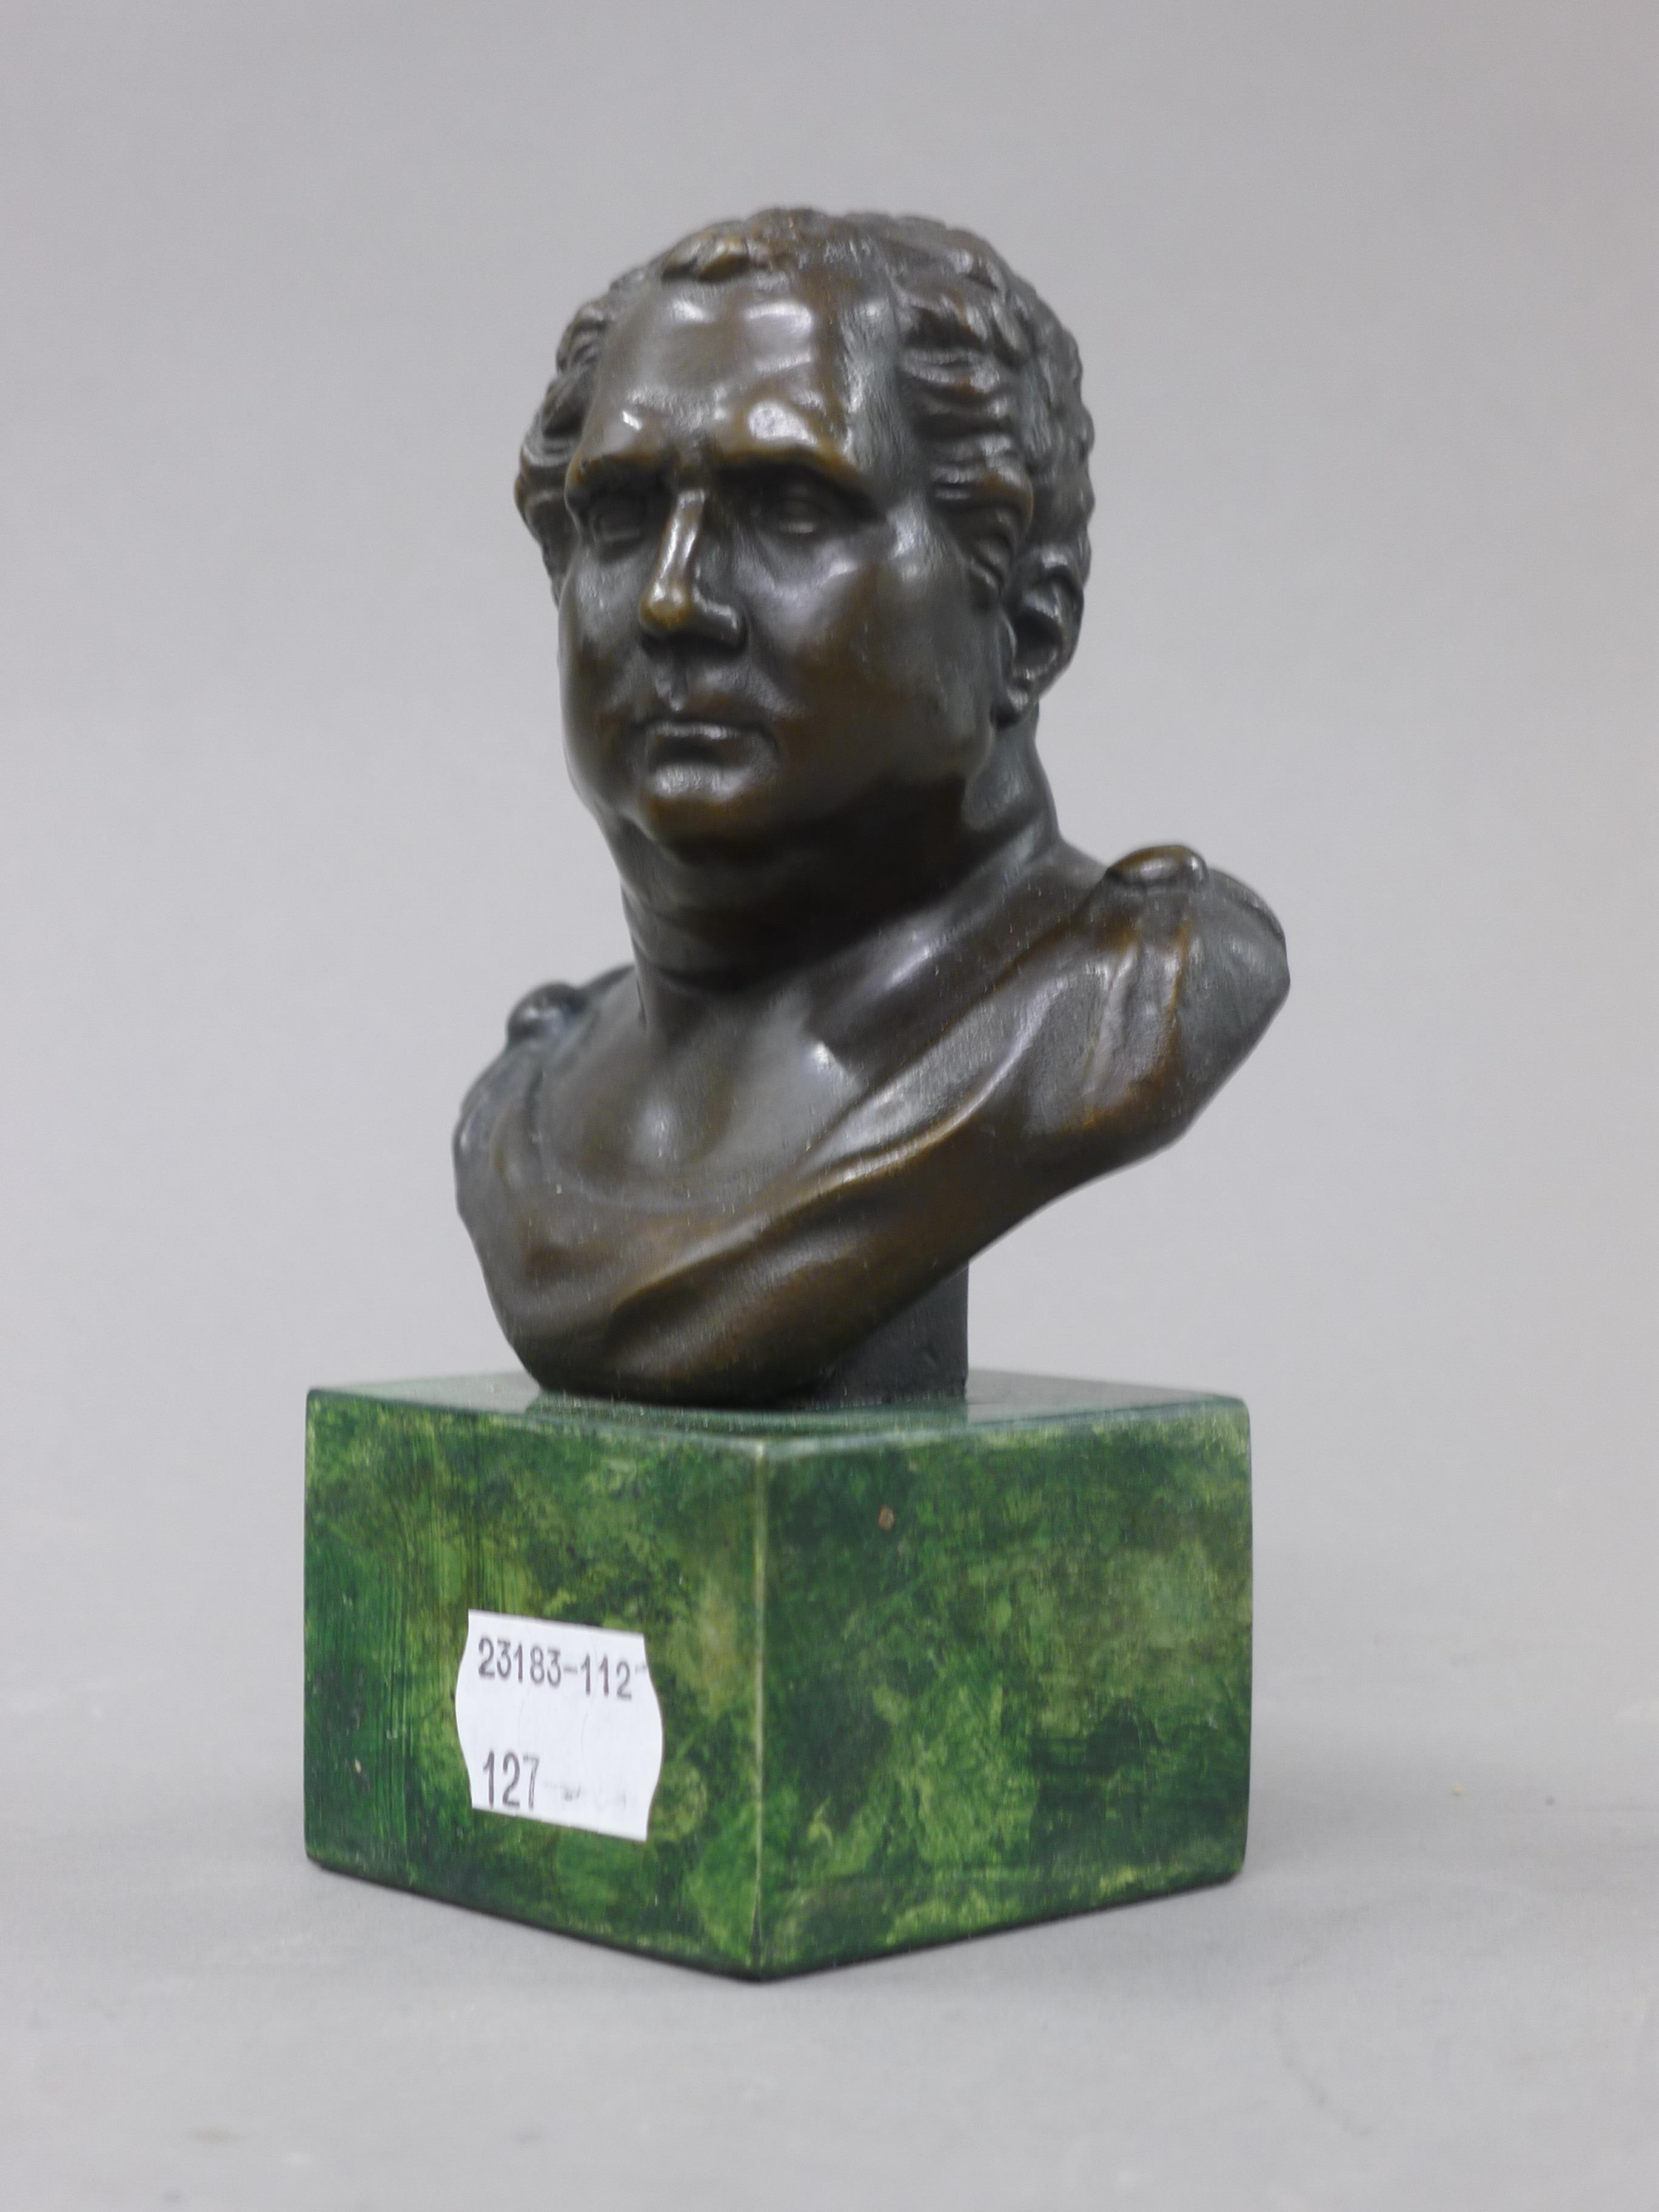 A small bronze bust on a marble plinth. 14 cm high. - Image 2 of 3